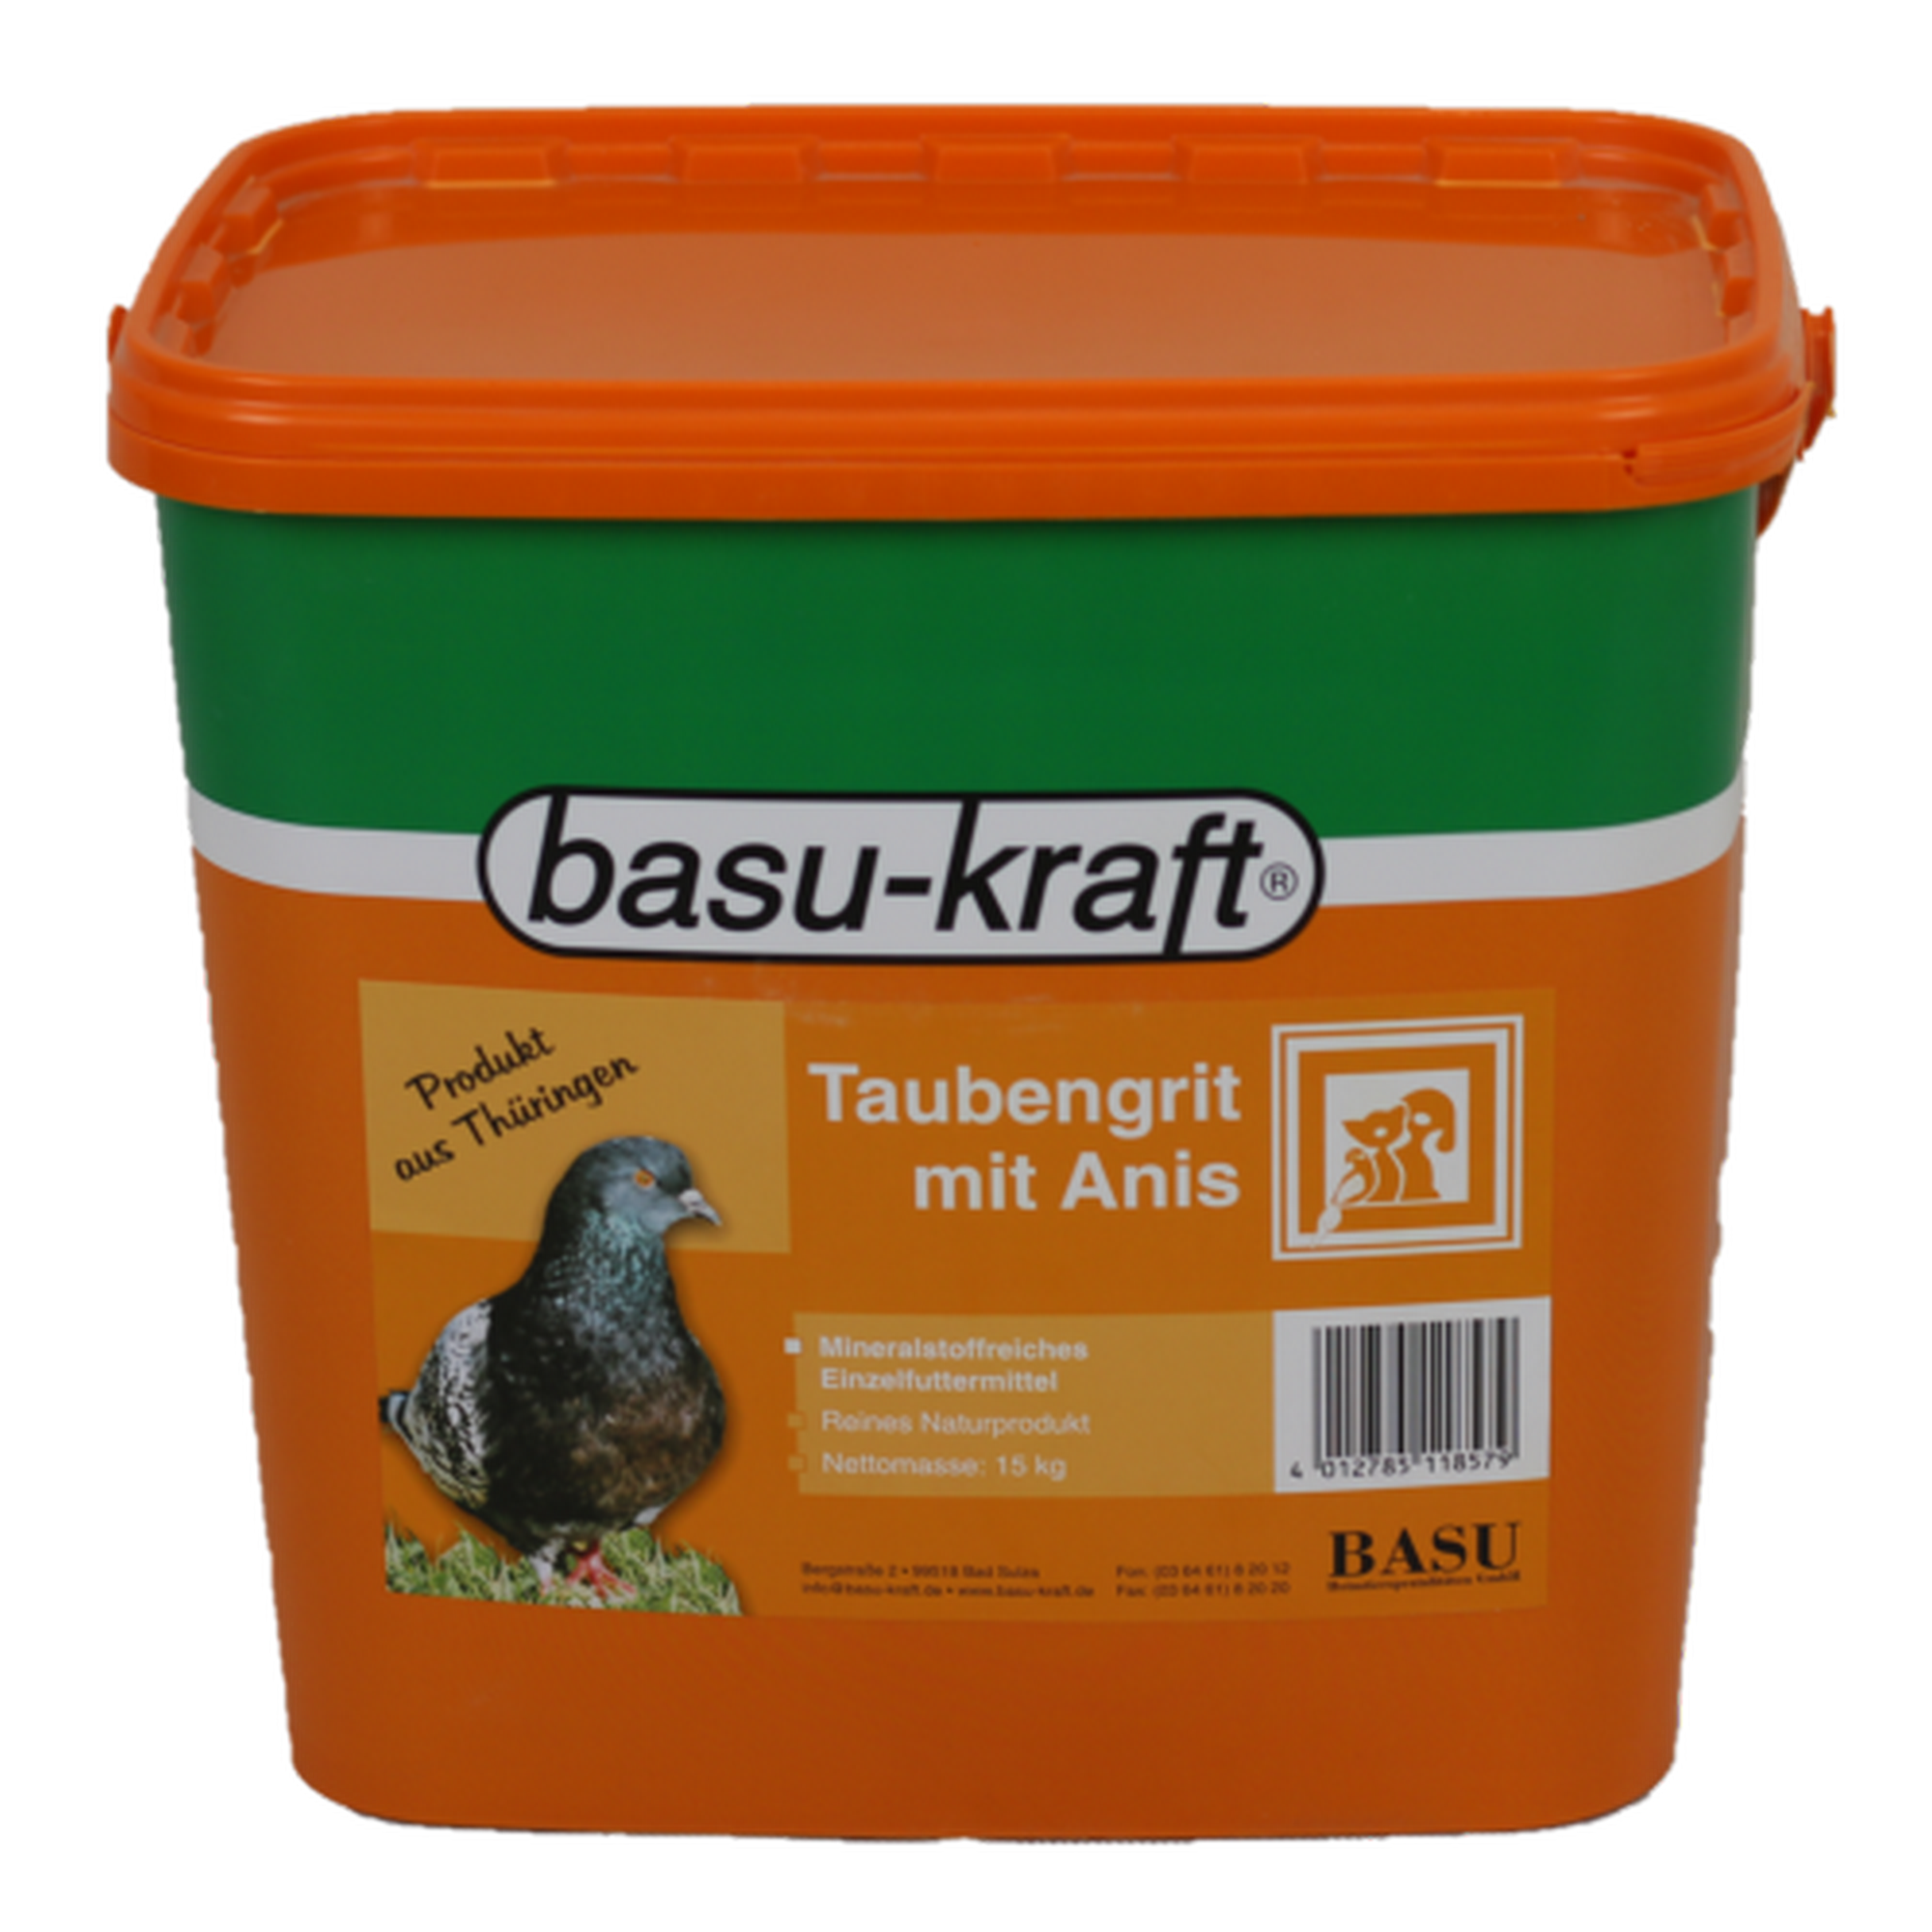 Taubengrit mit Anis 15 kg + product picture